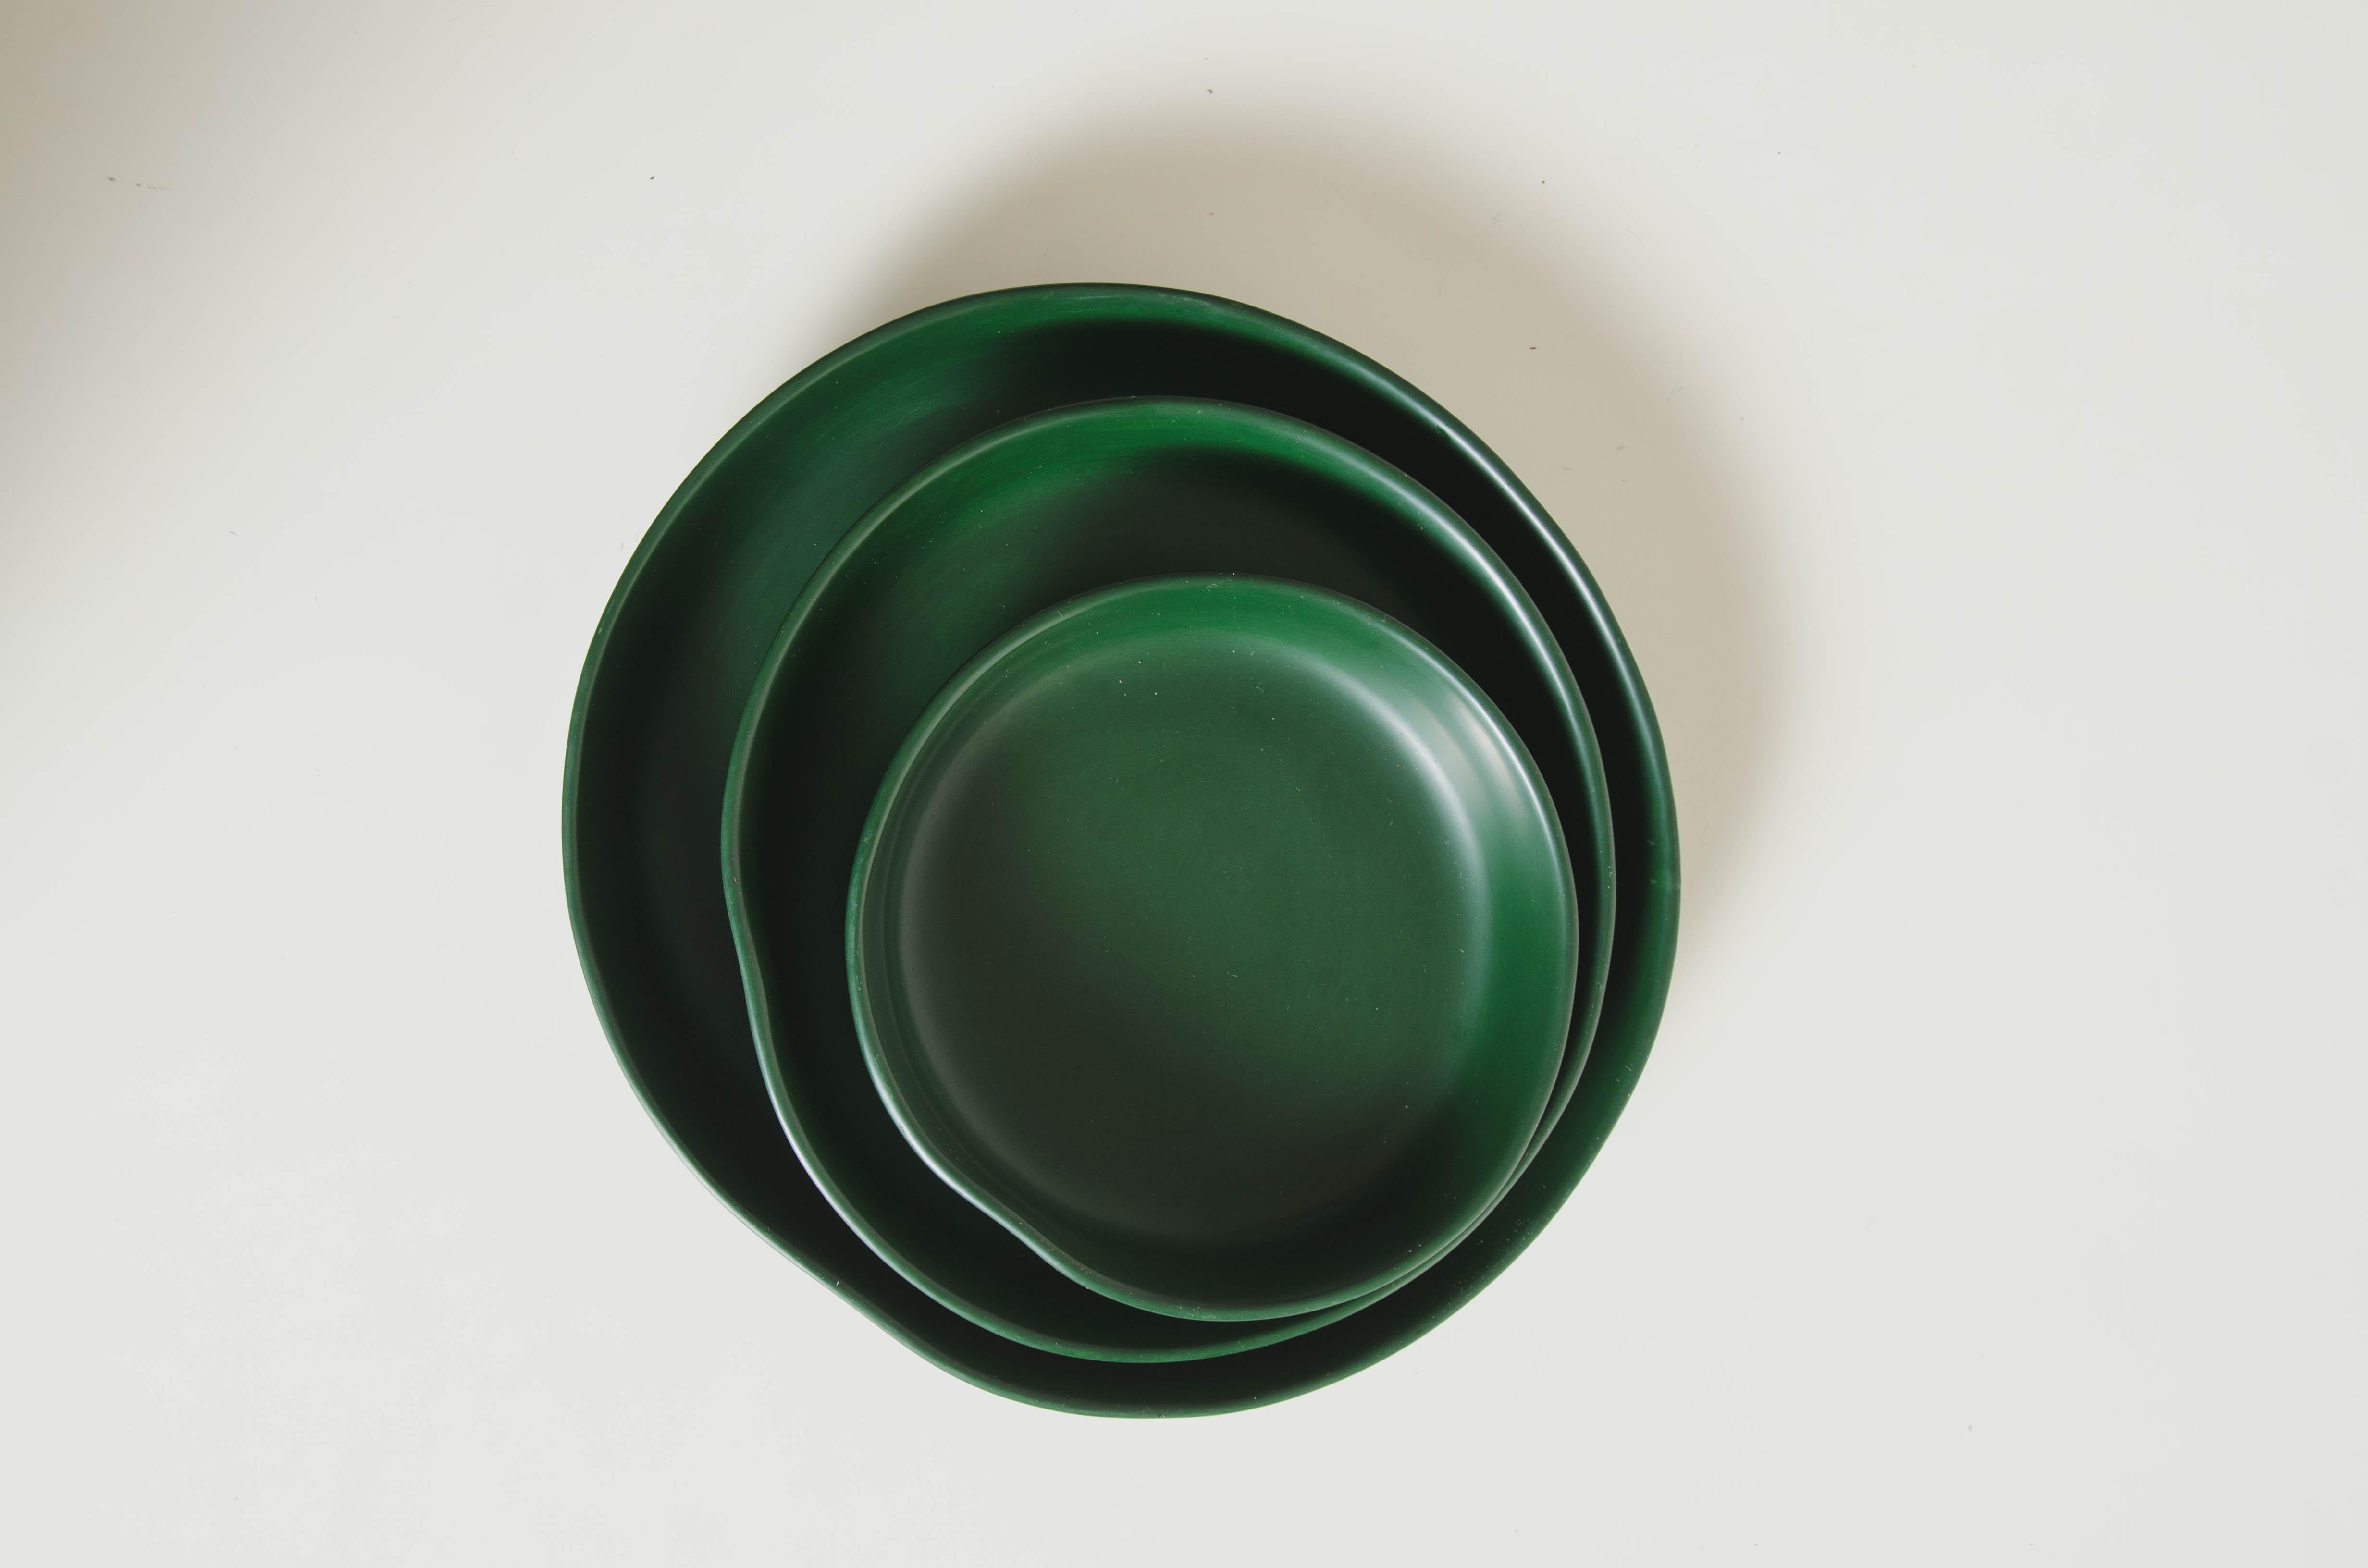 Round Plates, Set of 3, Green Lacquer by Robert Kuo, Handmade, Limited Edition For Sale 4